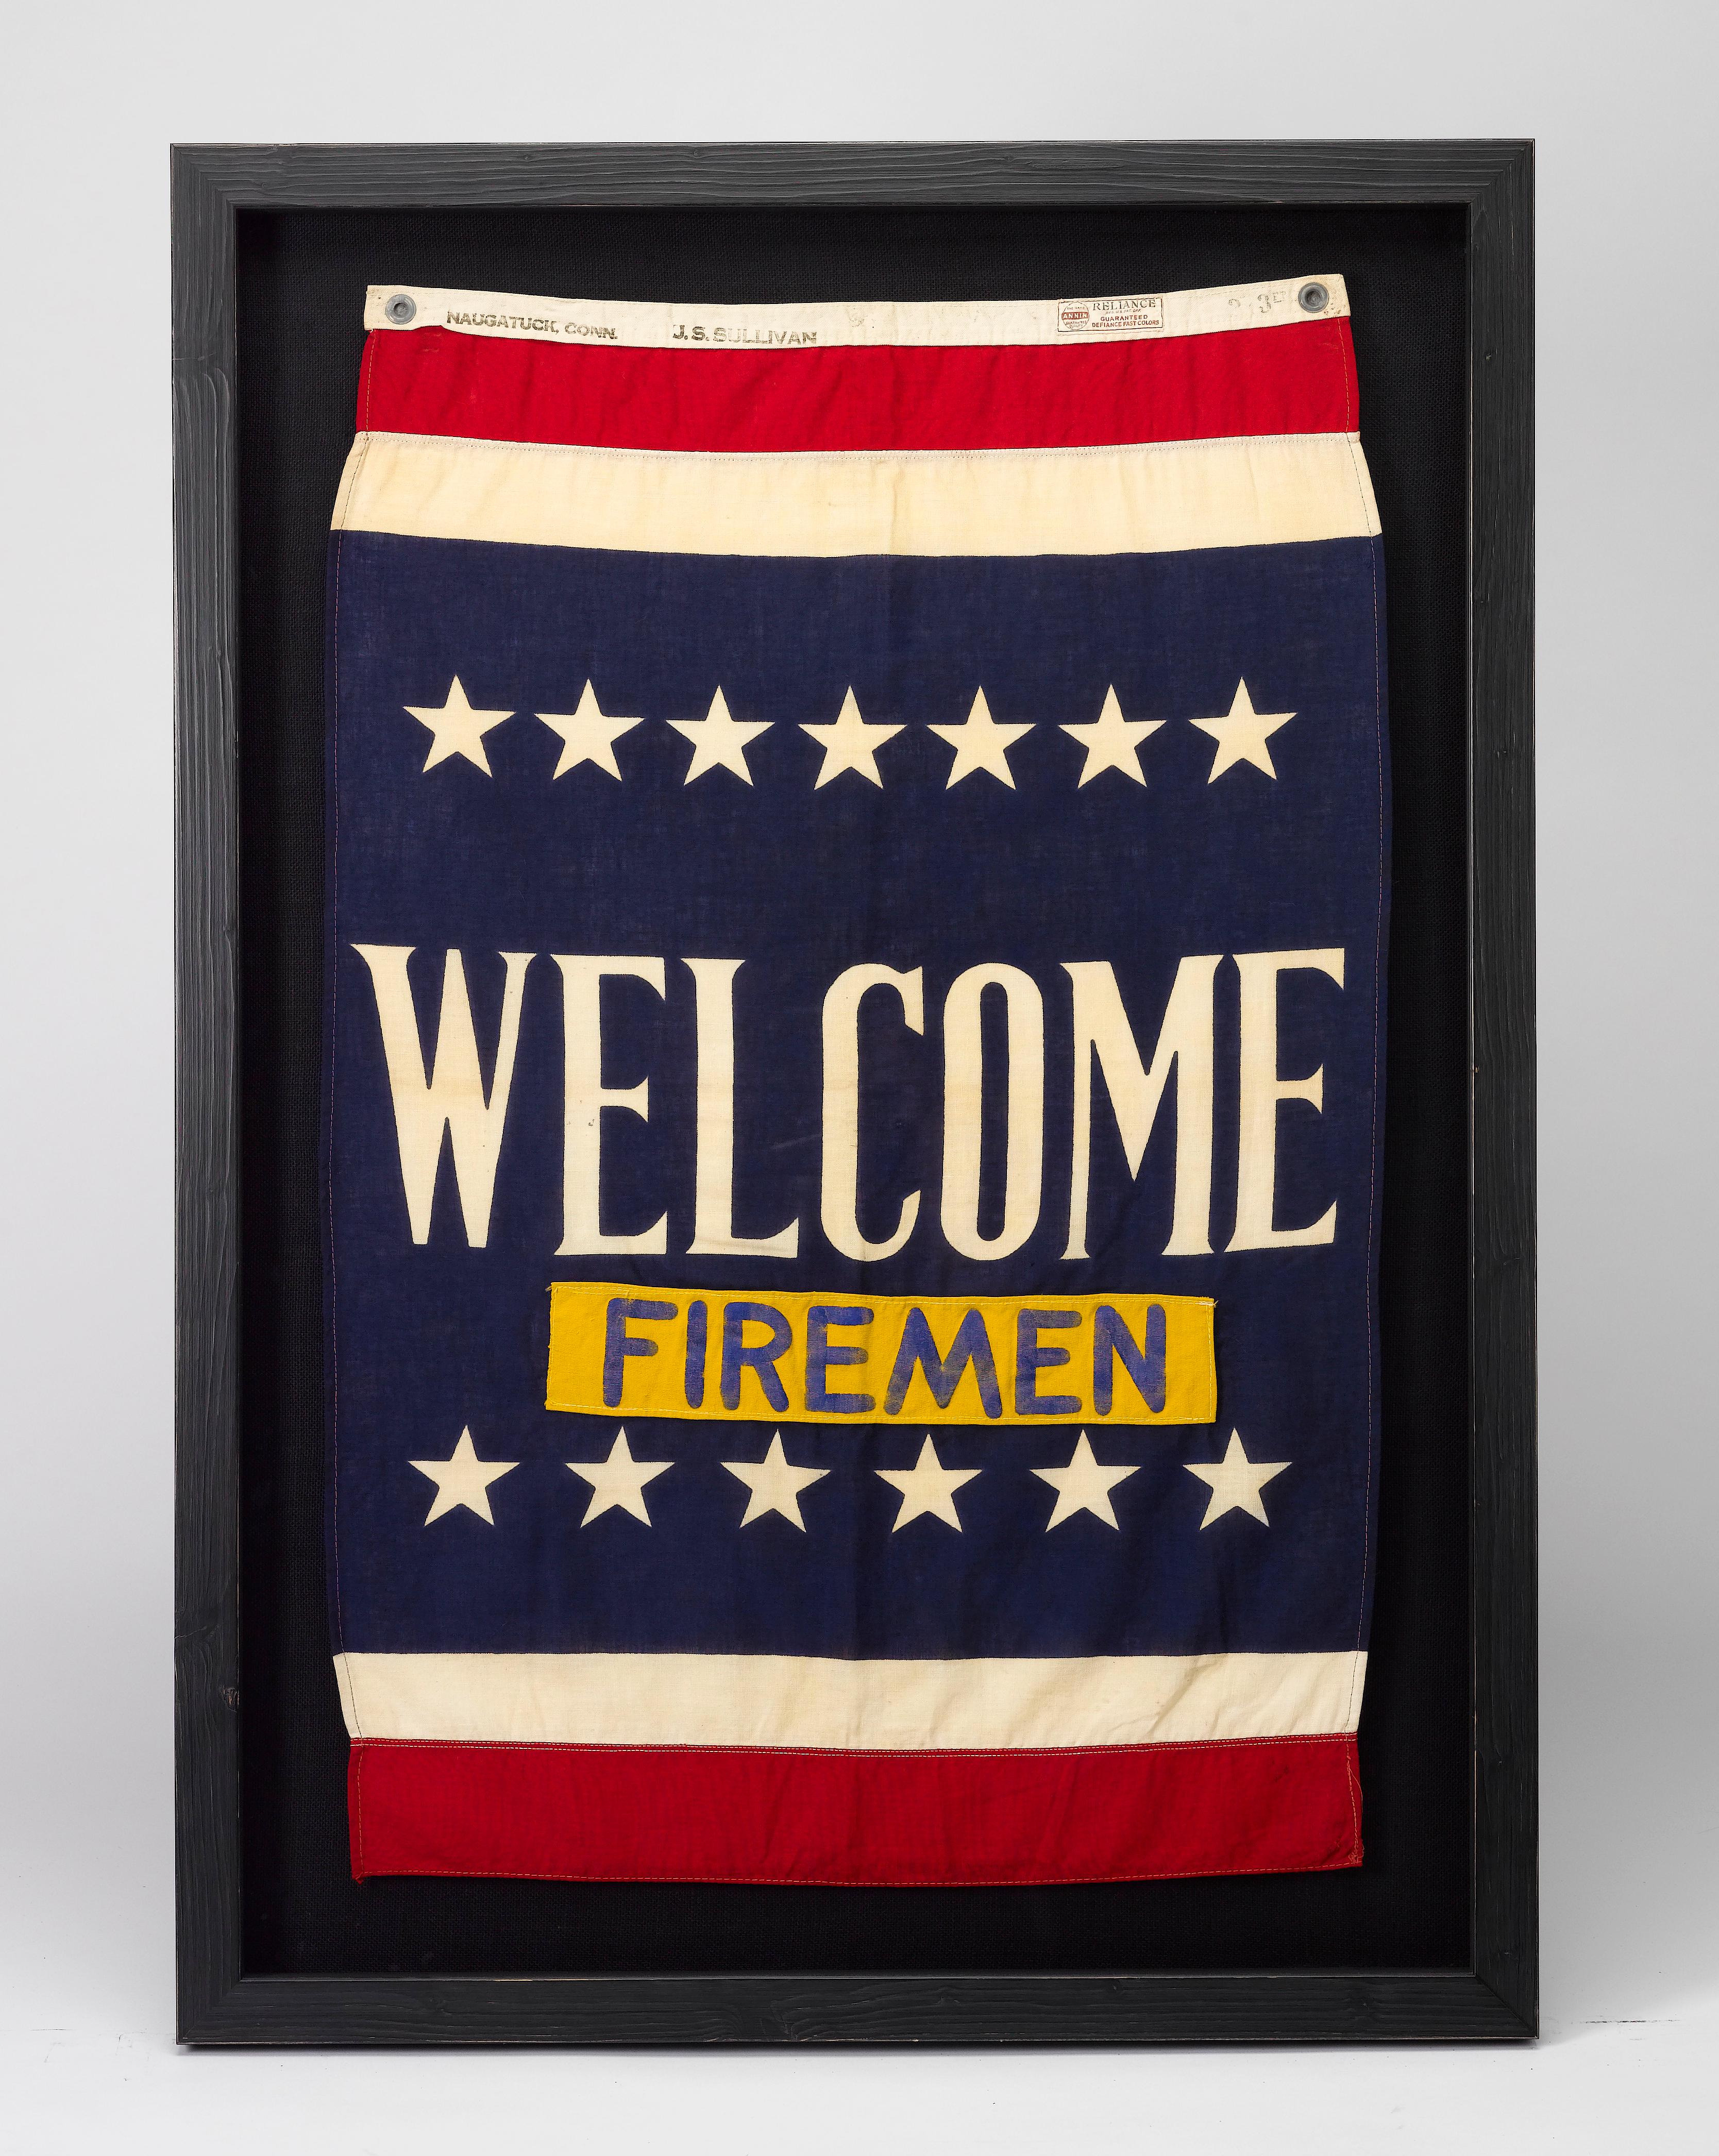 This is a beautifully preserved WWII Navy aircraft carrier banner, emblazoned with a welcome for the ship's firemen.

The banner is partially printed and has sewn elements. The flag's field is dyed a rich navy blue, with a resist dyed white stripe